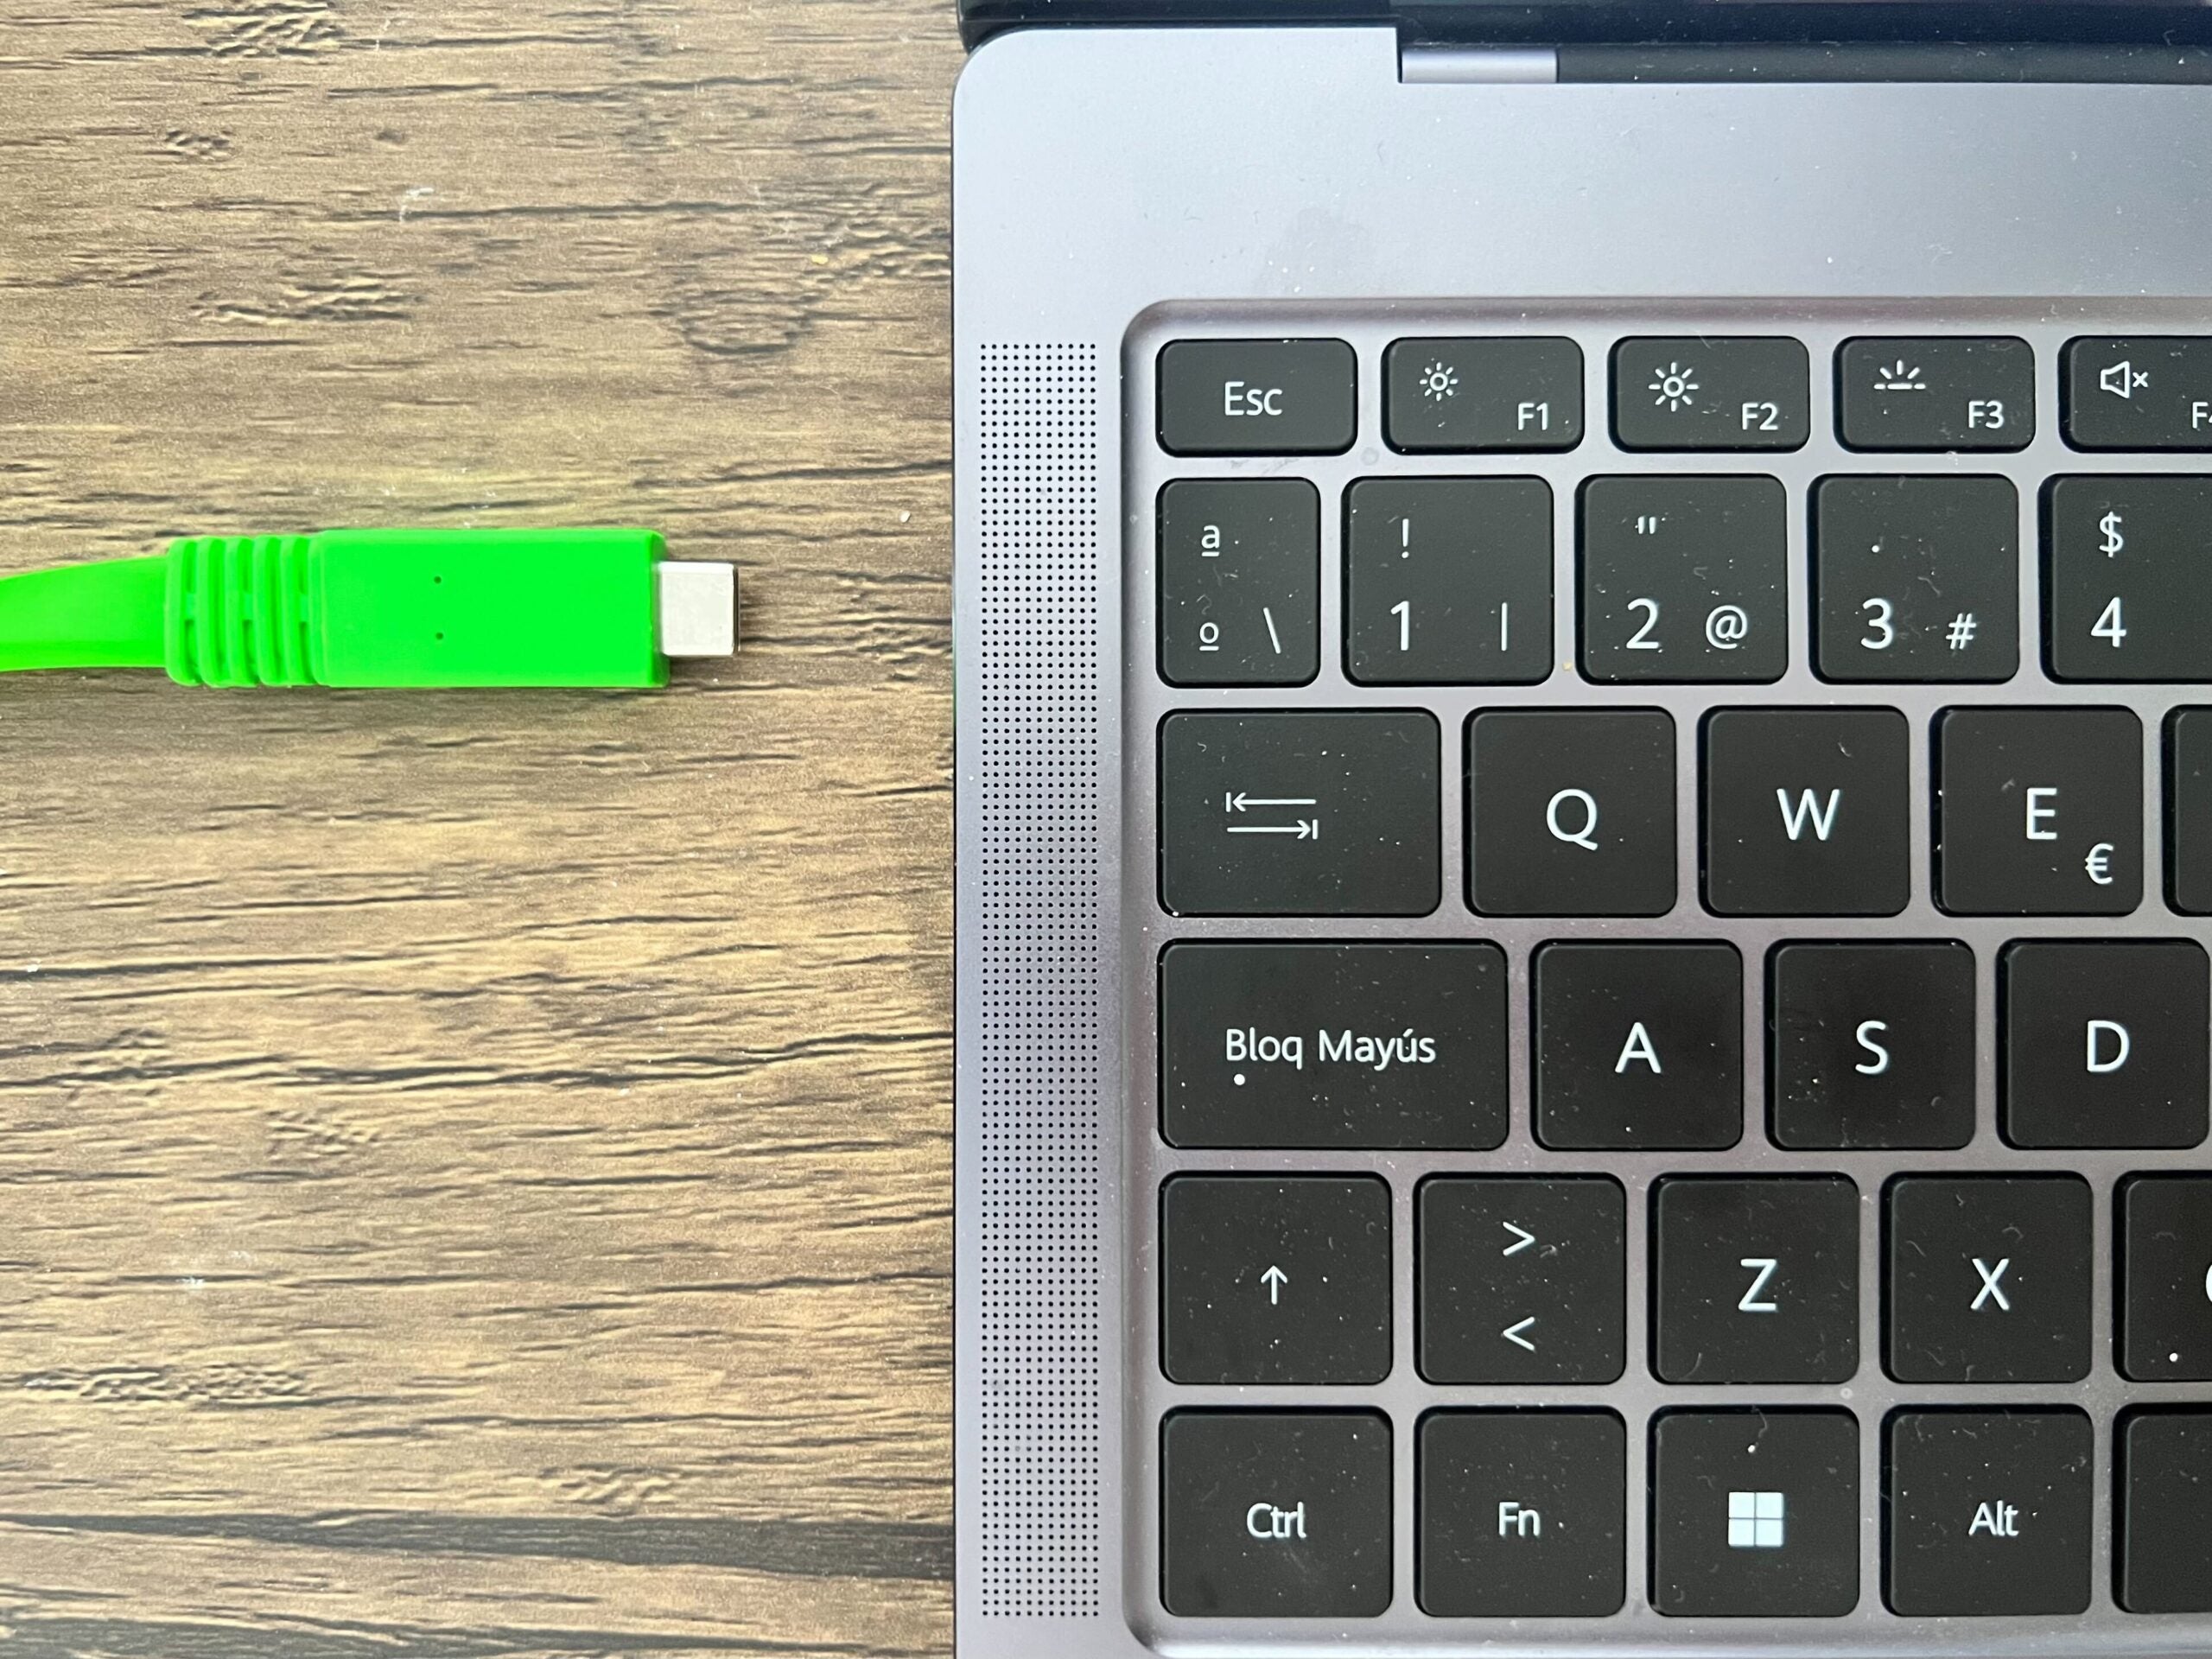 Connect a USB-C cable to your laptop to start